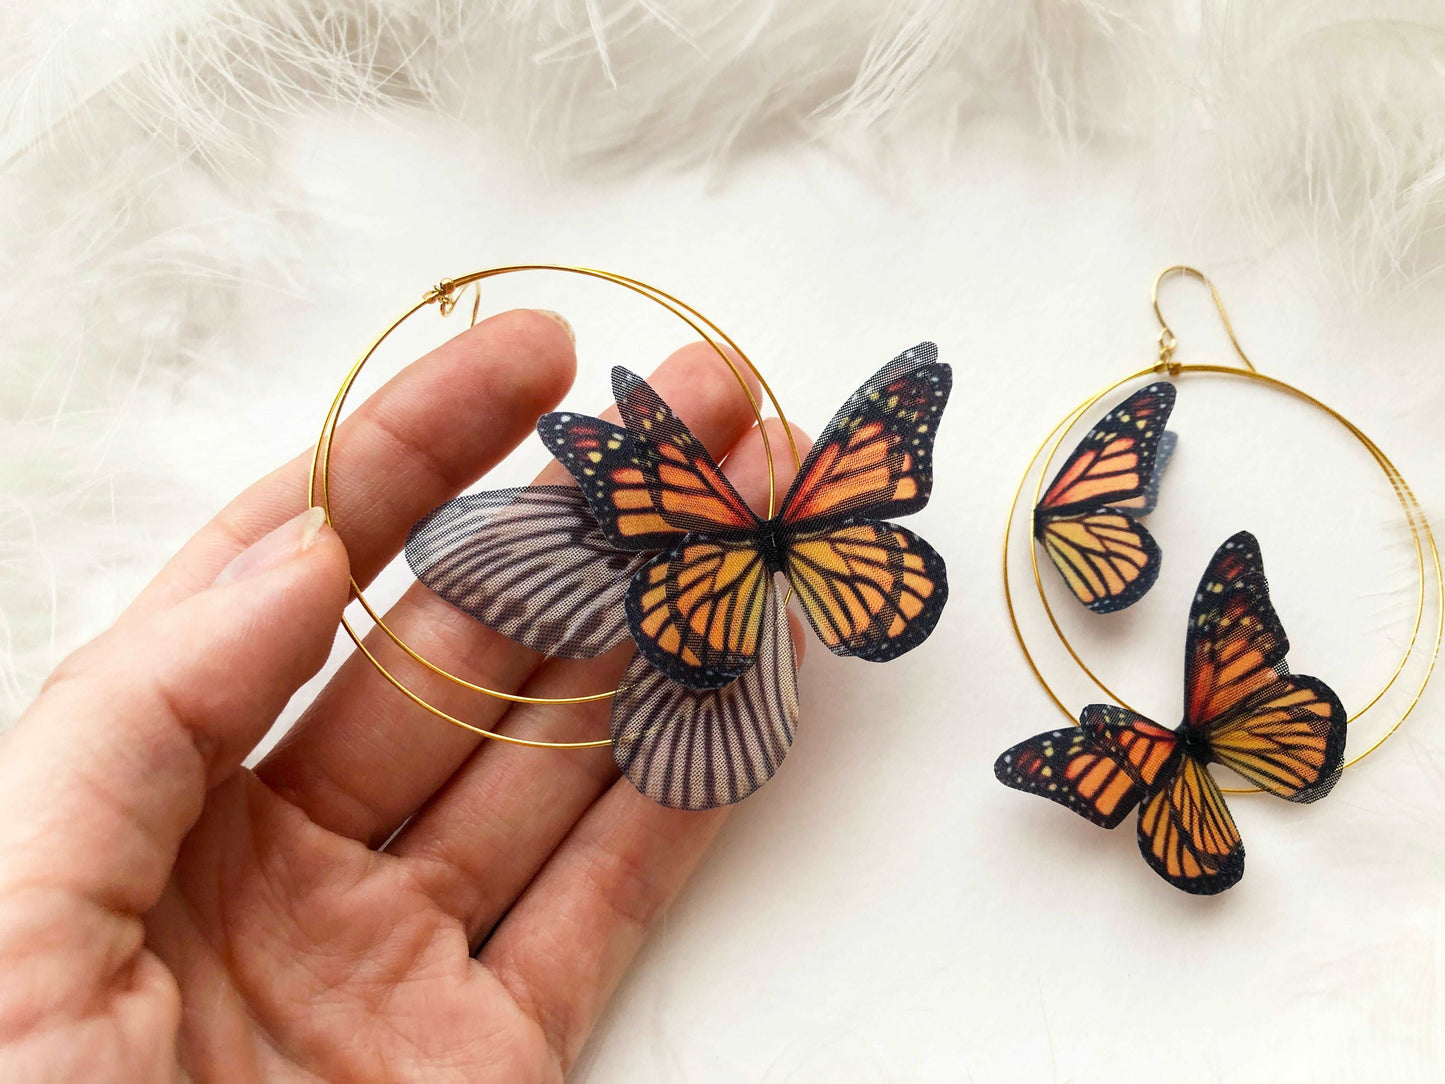 Monarch Butterfly Hoop Earrings from above, showcasing the lightweight gold-tone hoop